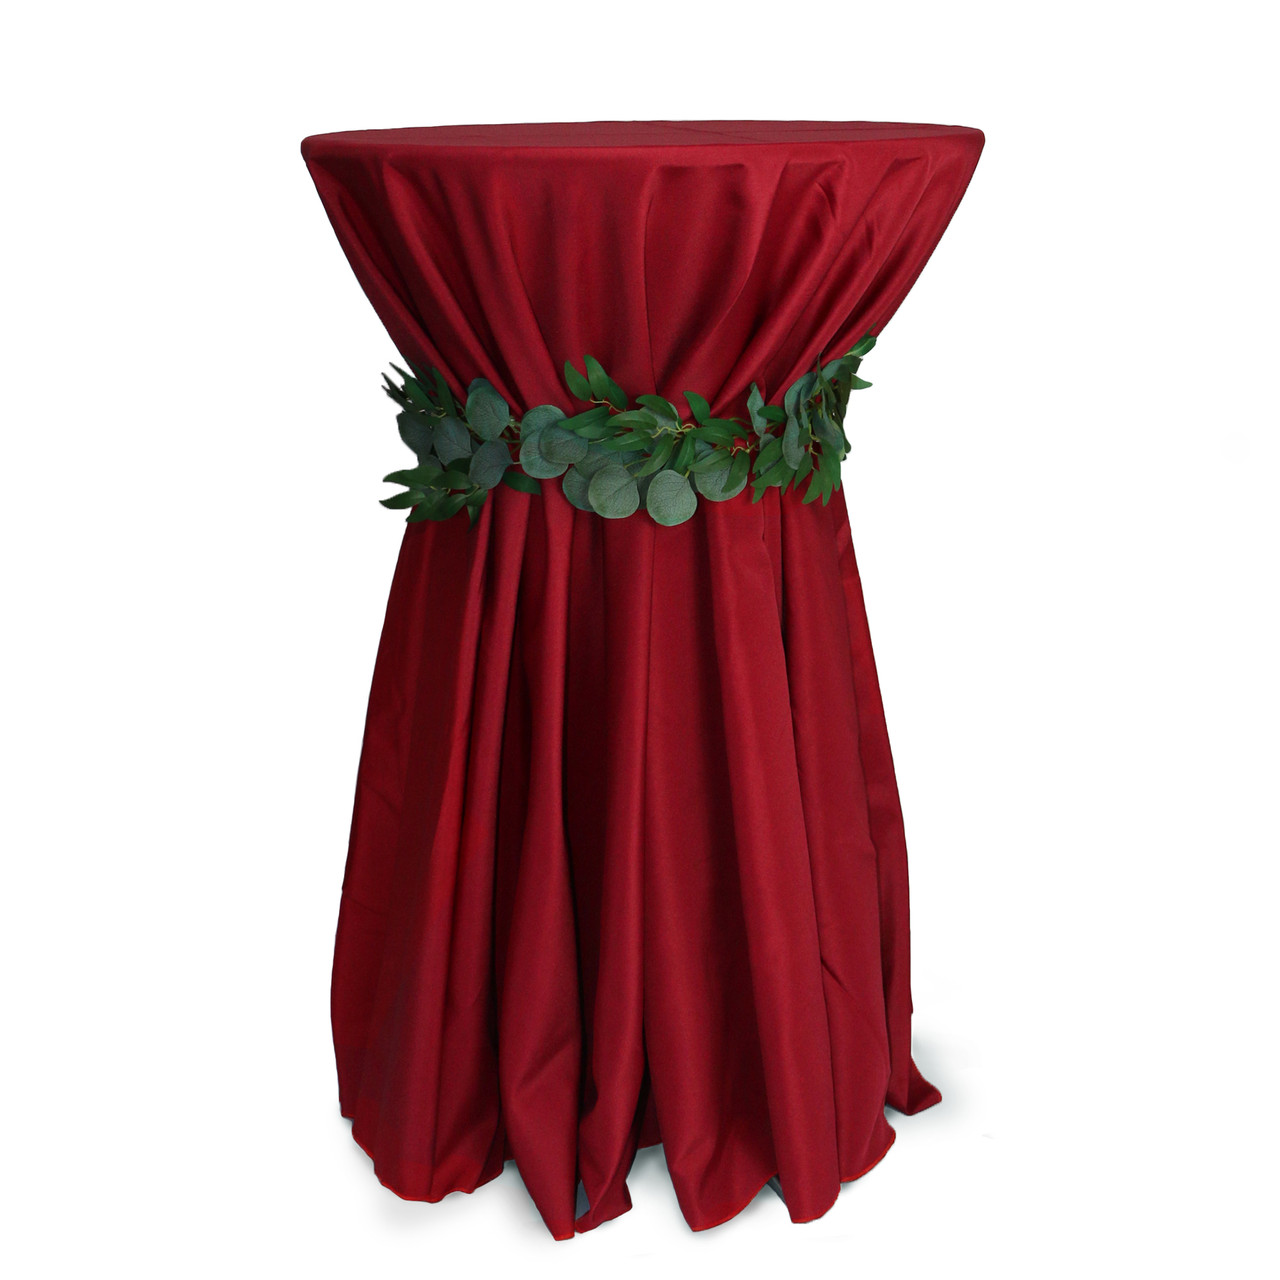 120 Inch Round Polyester Tablecloth Dark Red